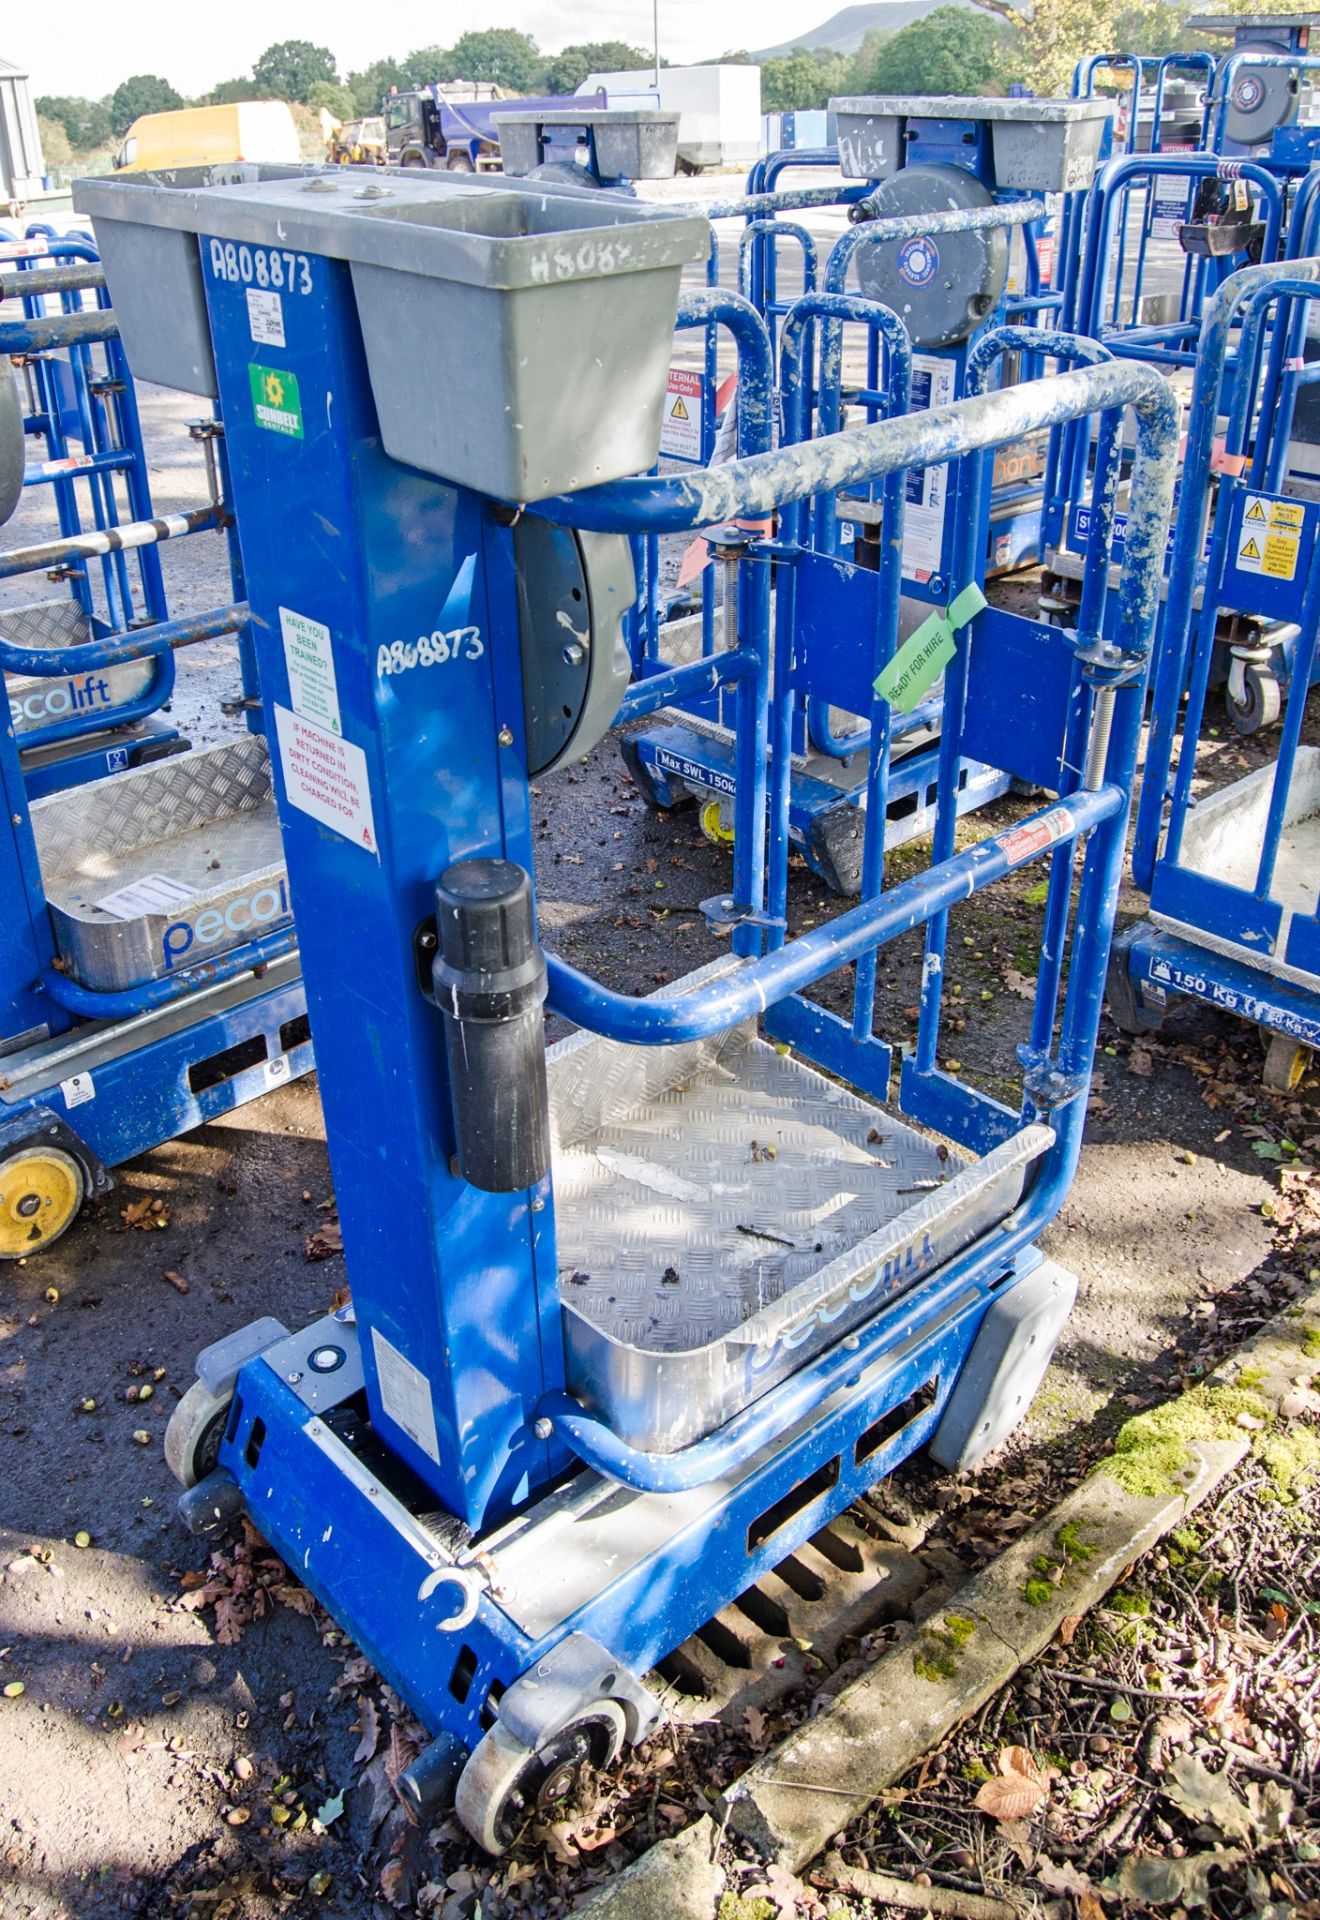 Power Tower Peco Lift push around manual vertical mast access platform A808873 - Image 2 of 3